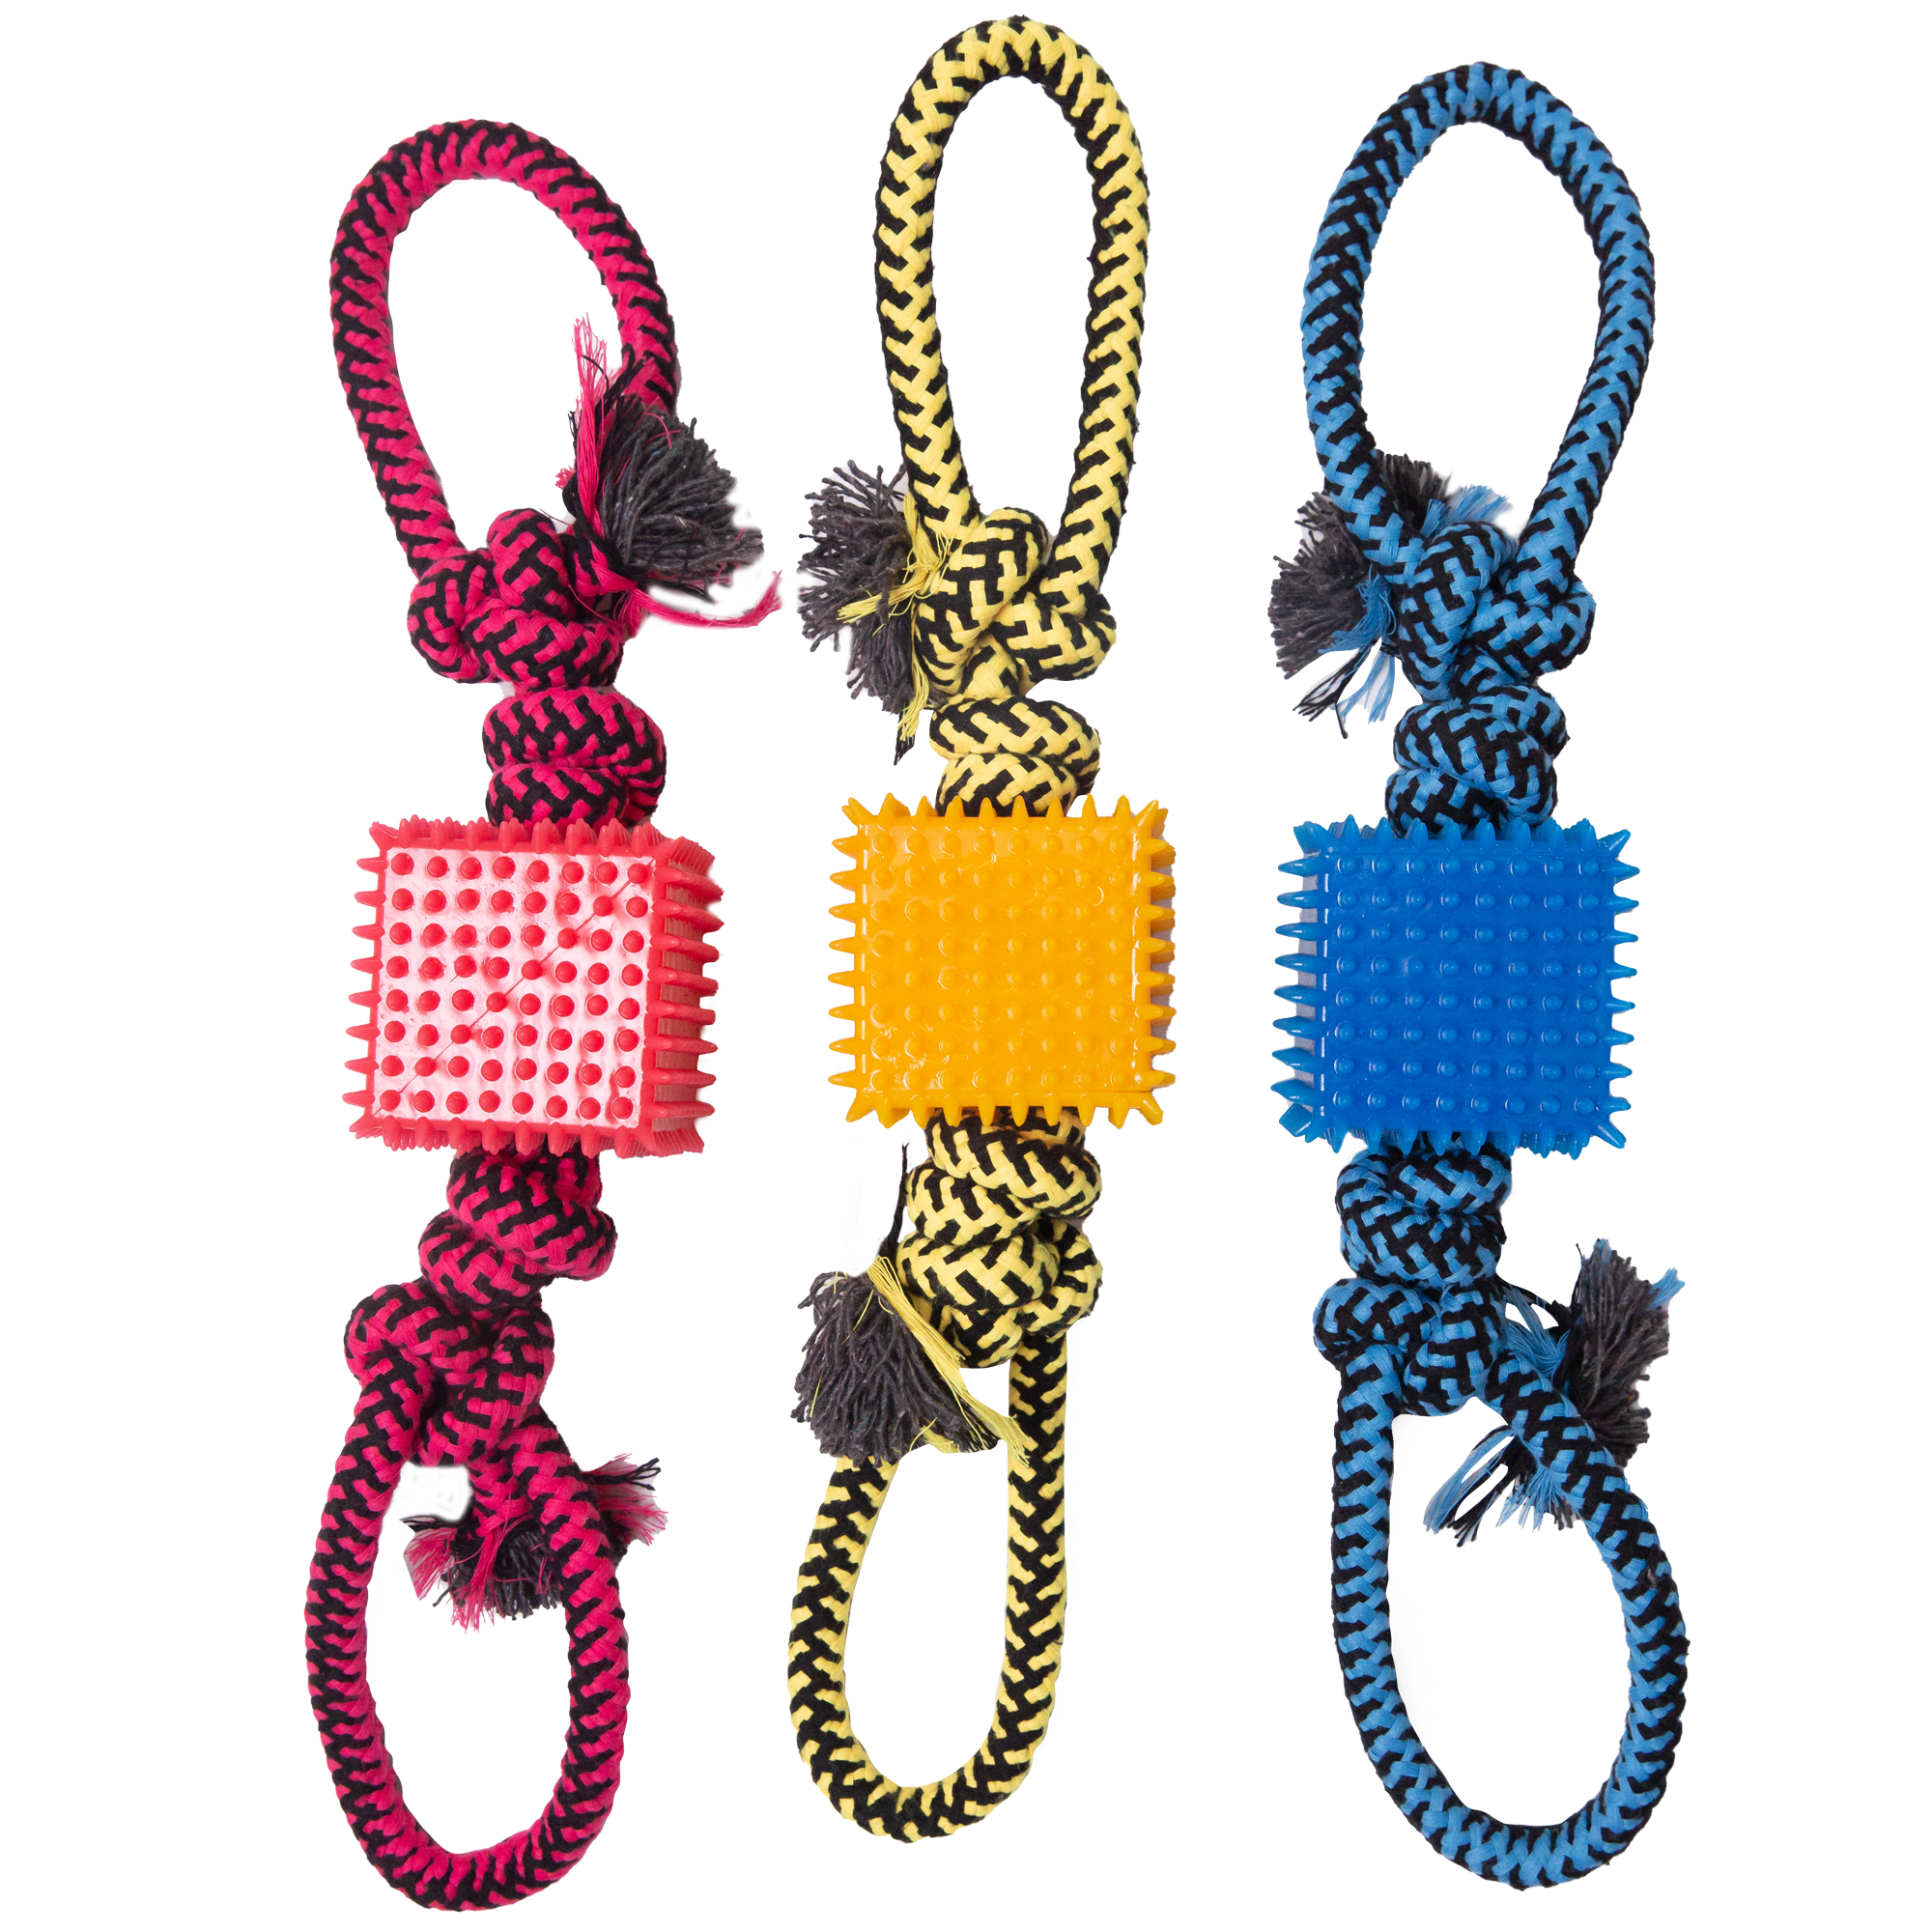 Baby Tug N Cube (Assorted Colors) - 16"